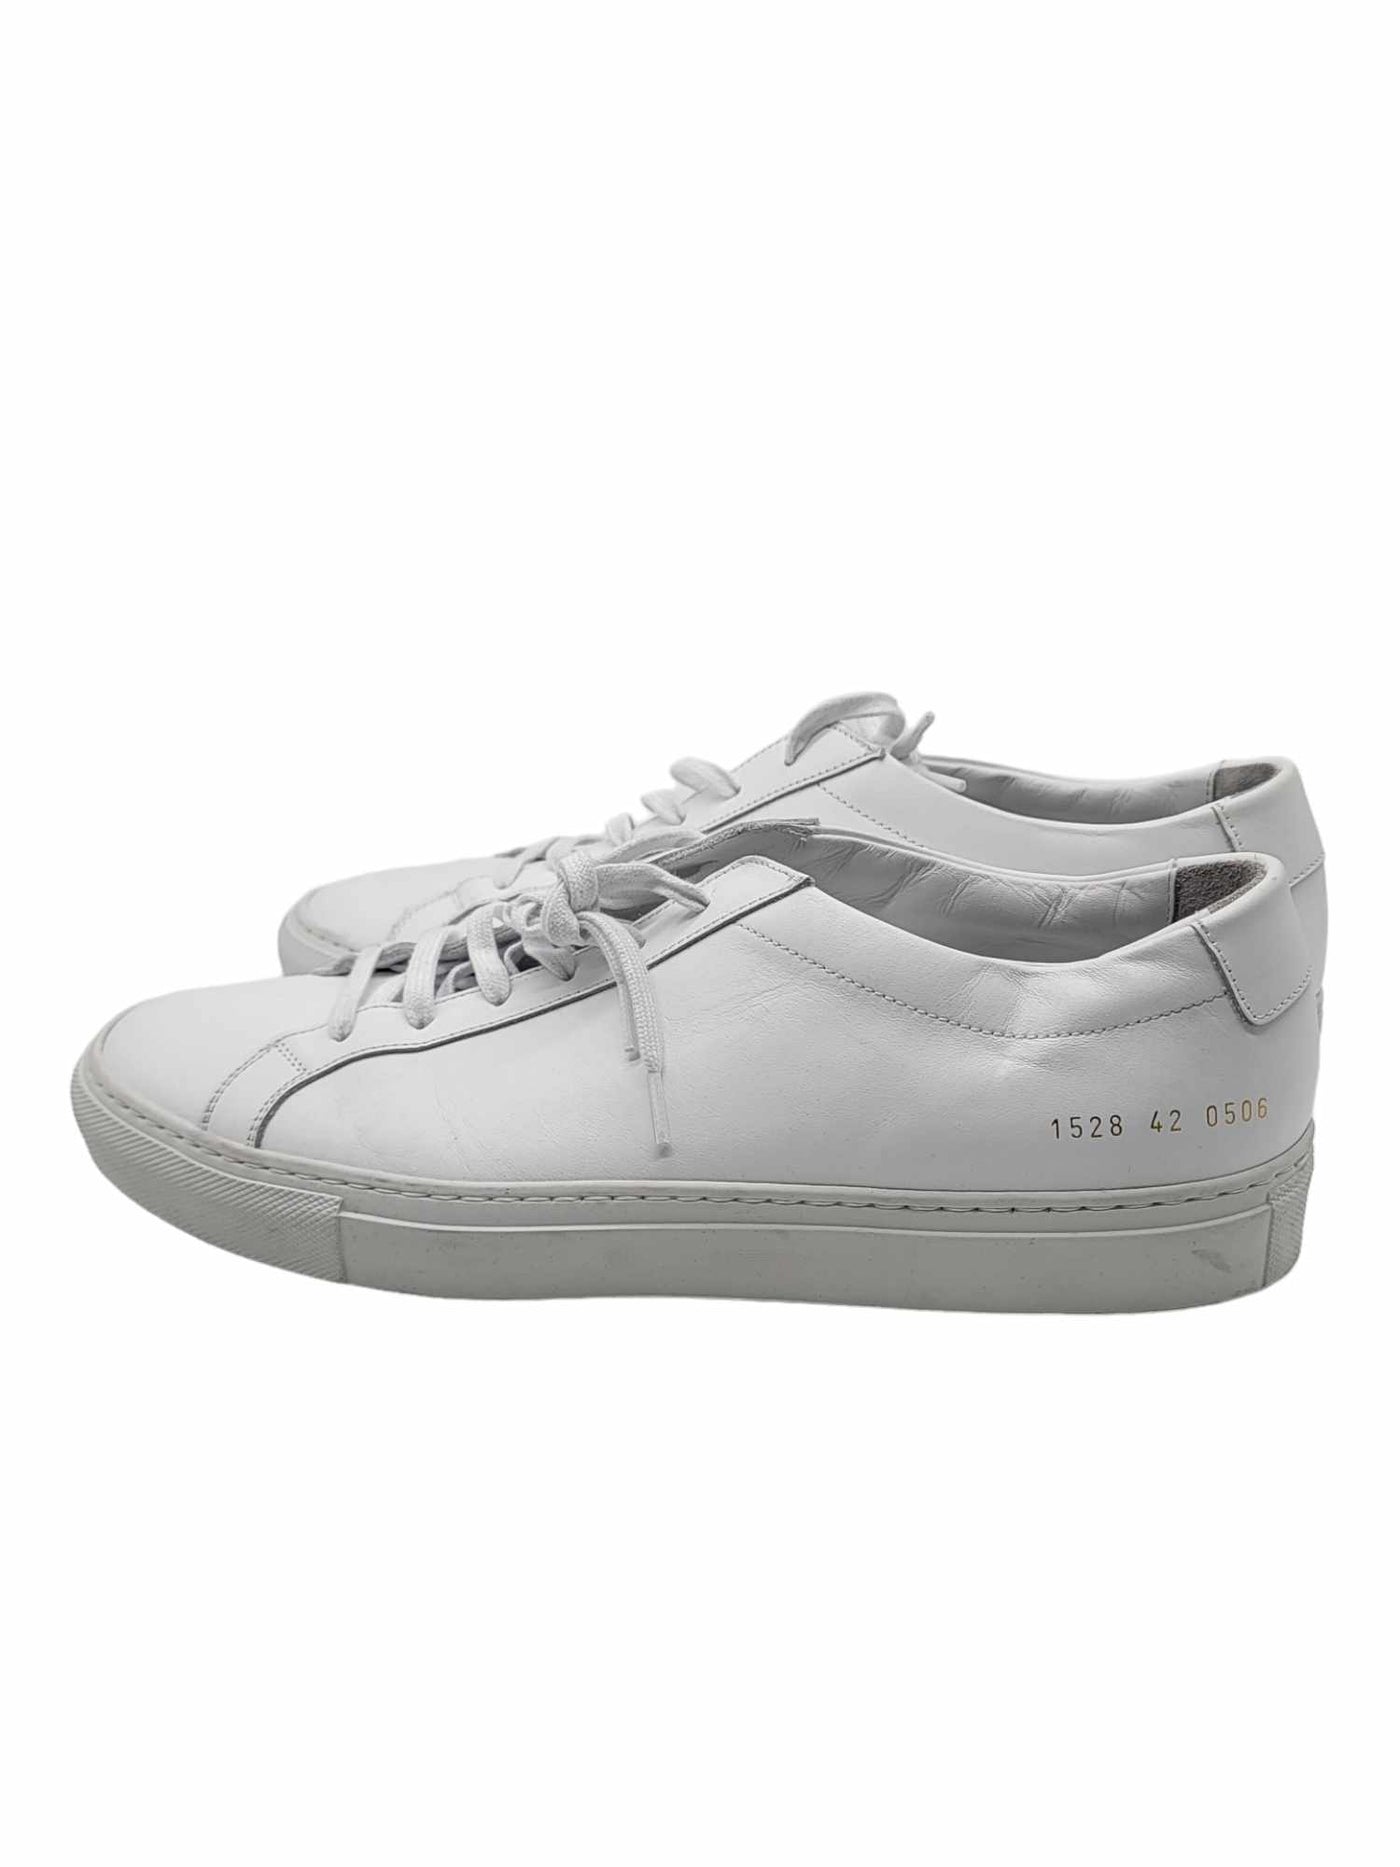 COMMON PROJECTS Achilles low-top trainers